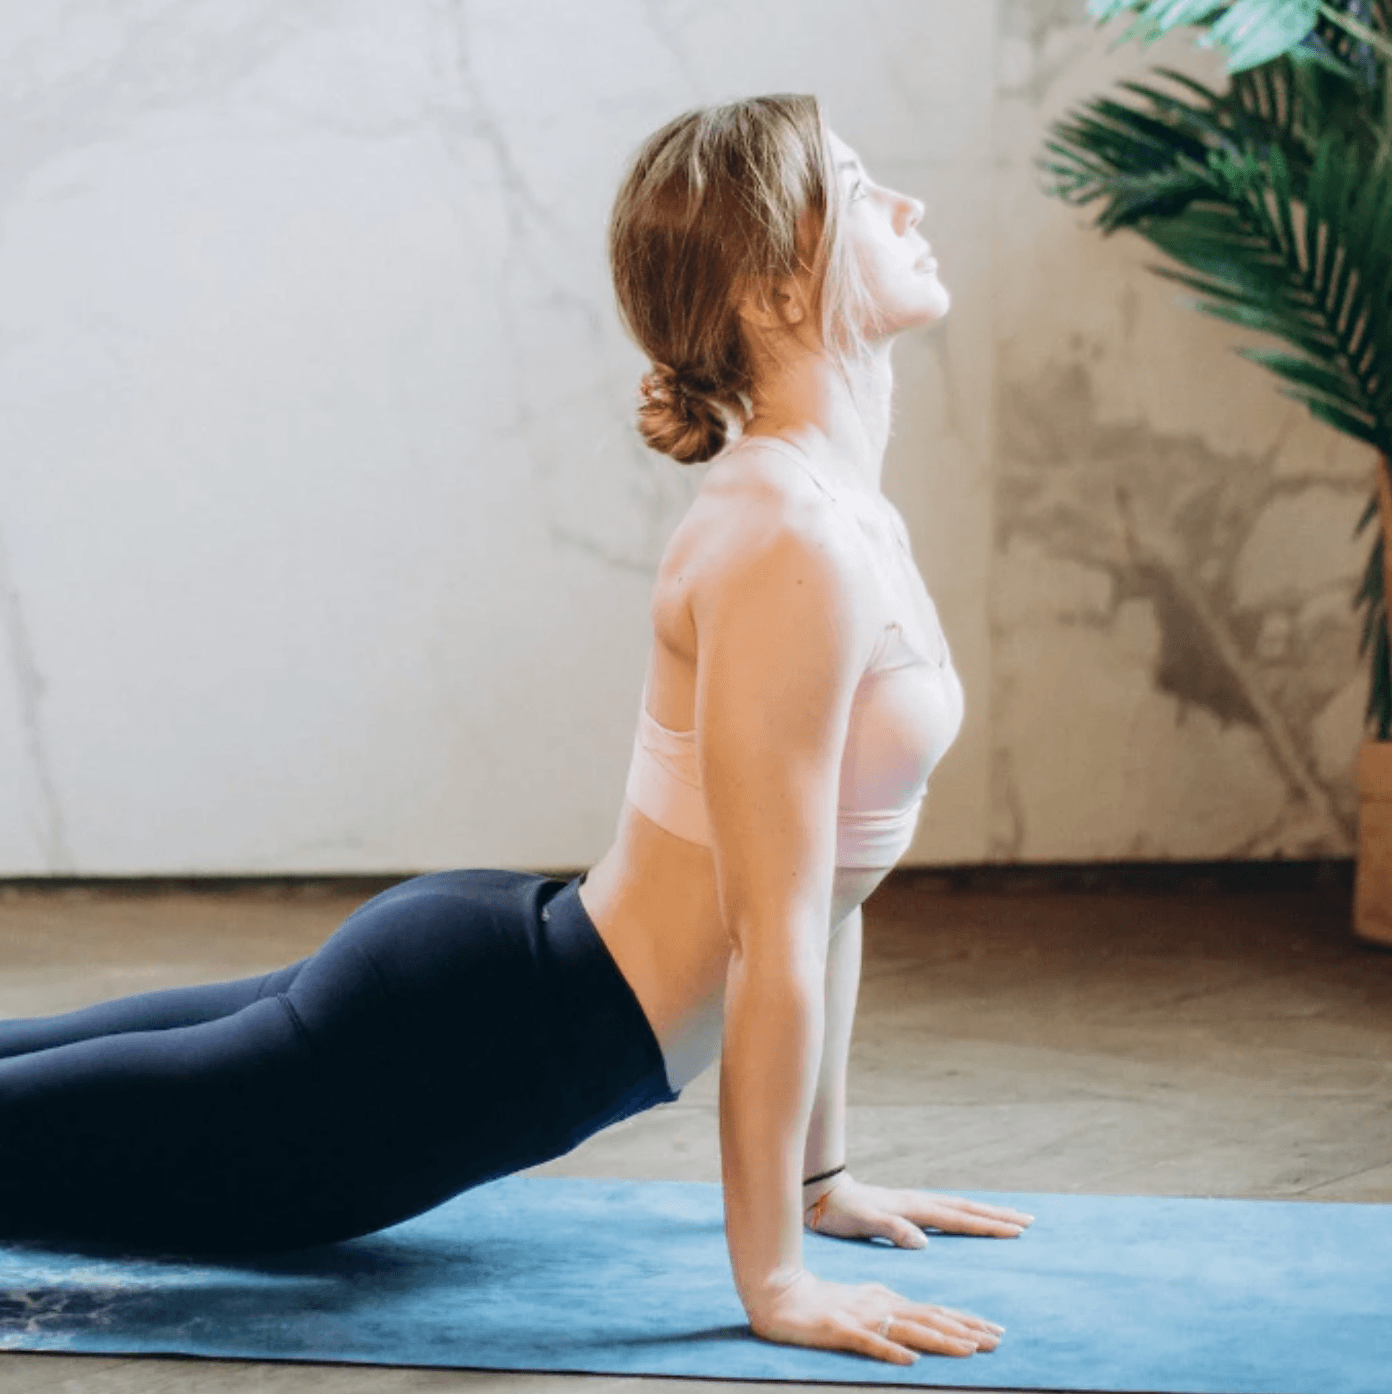 Try This Yoga Pose NOW to Feel Stronger, Lighter and Pain-Free